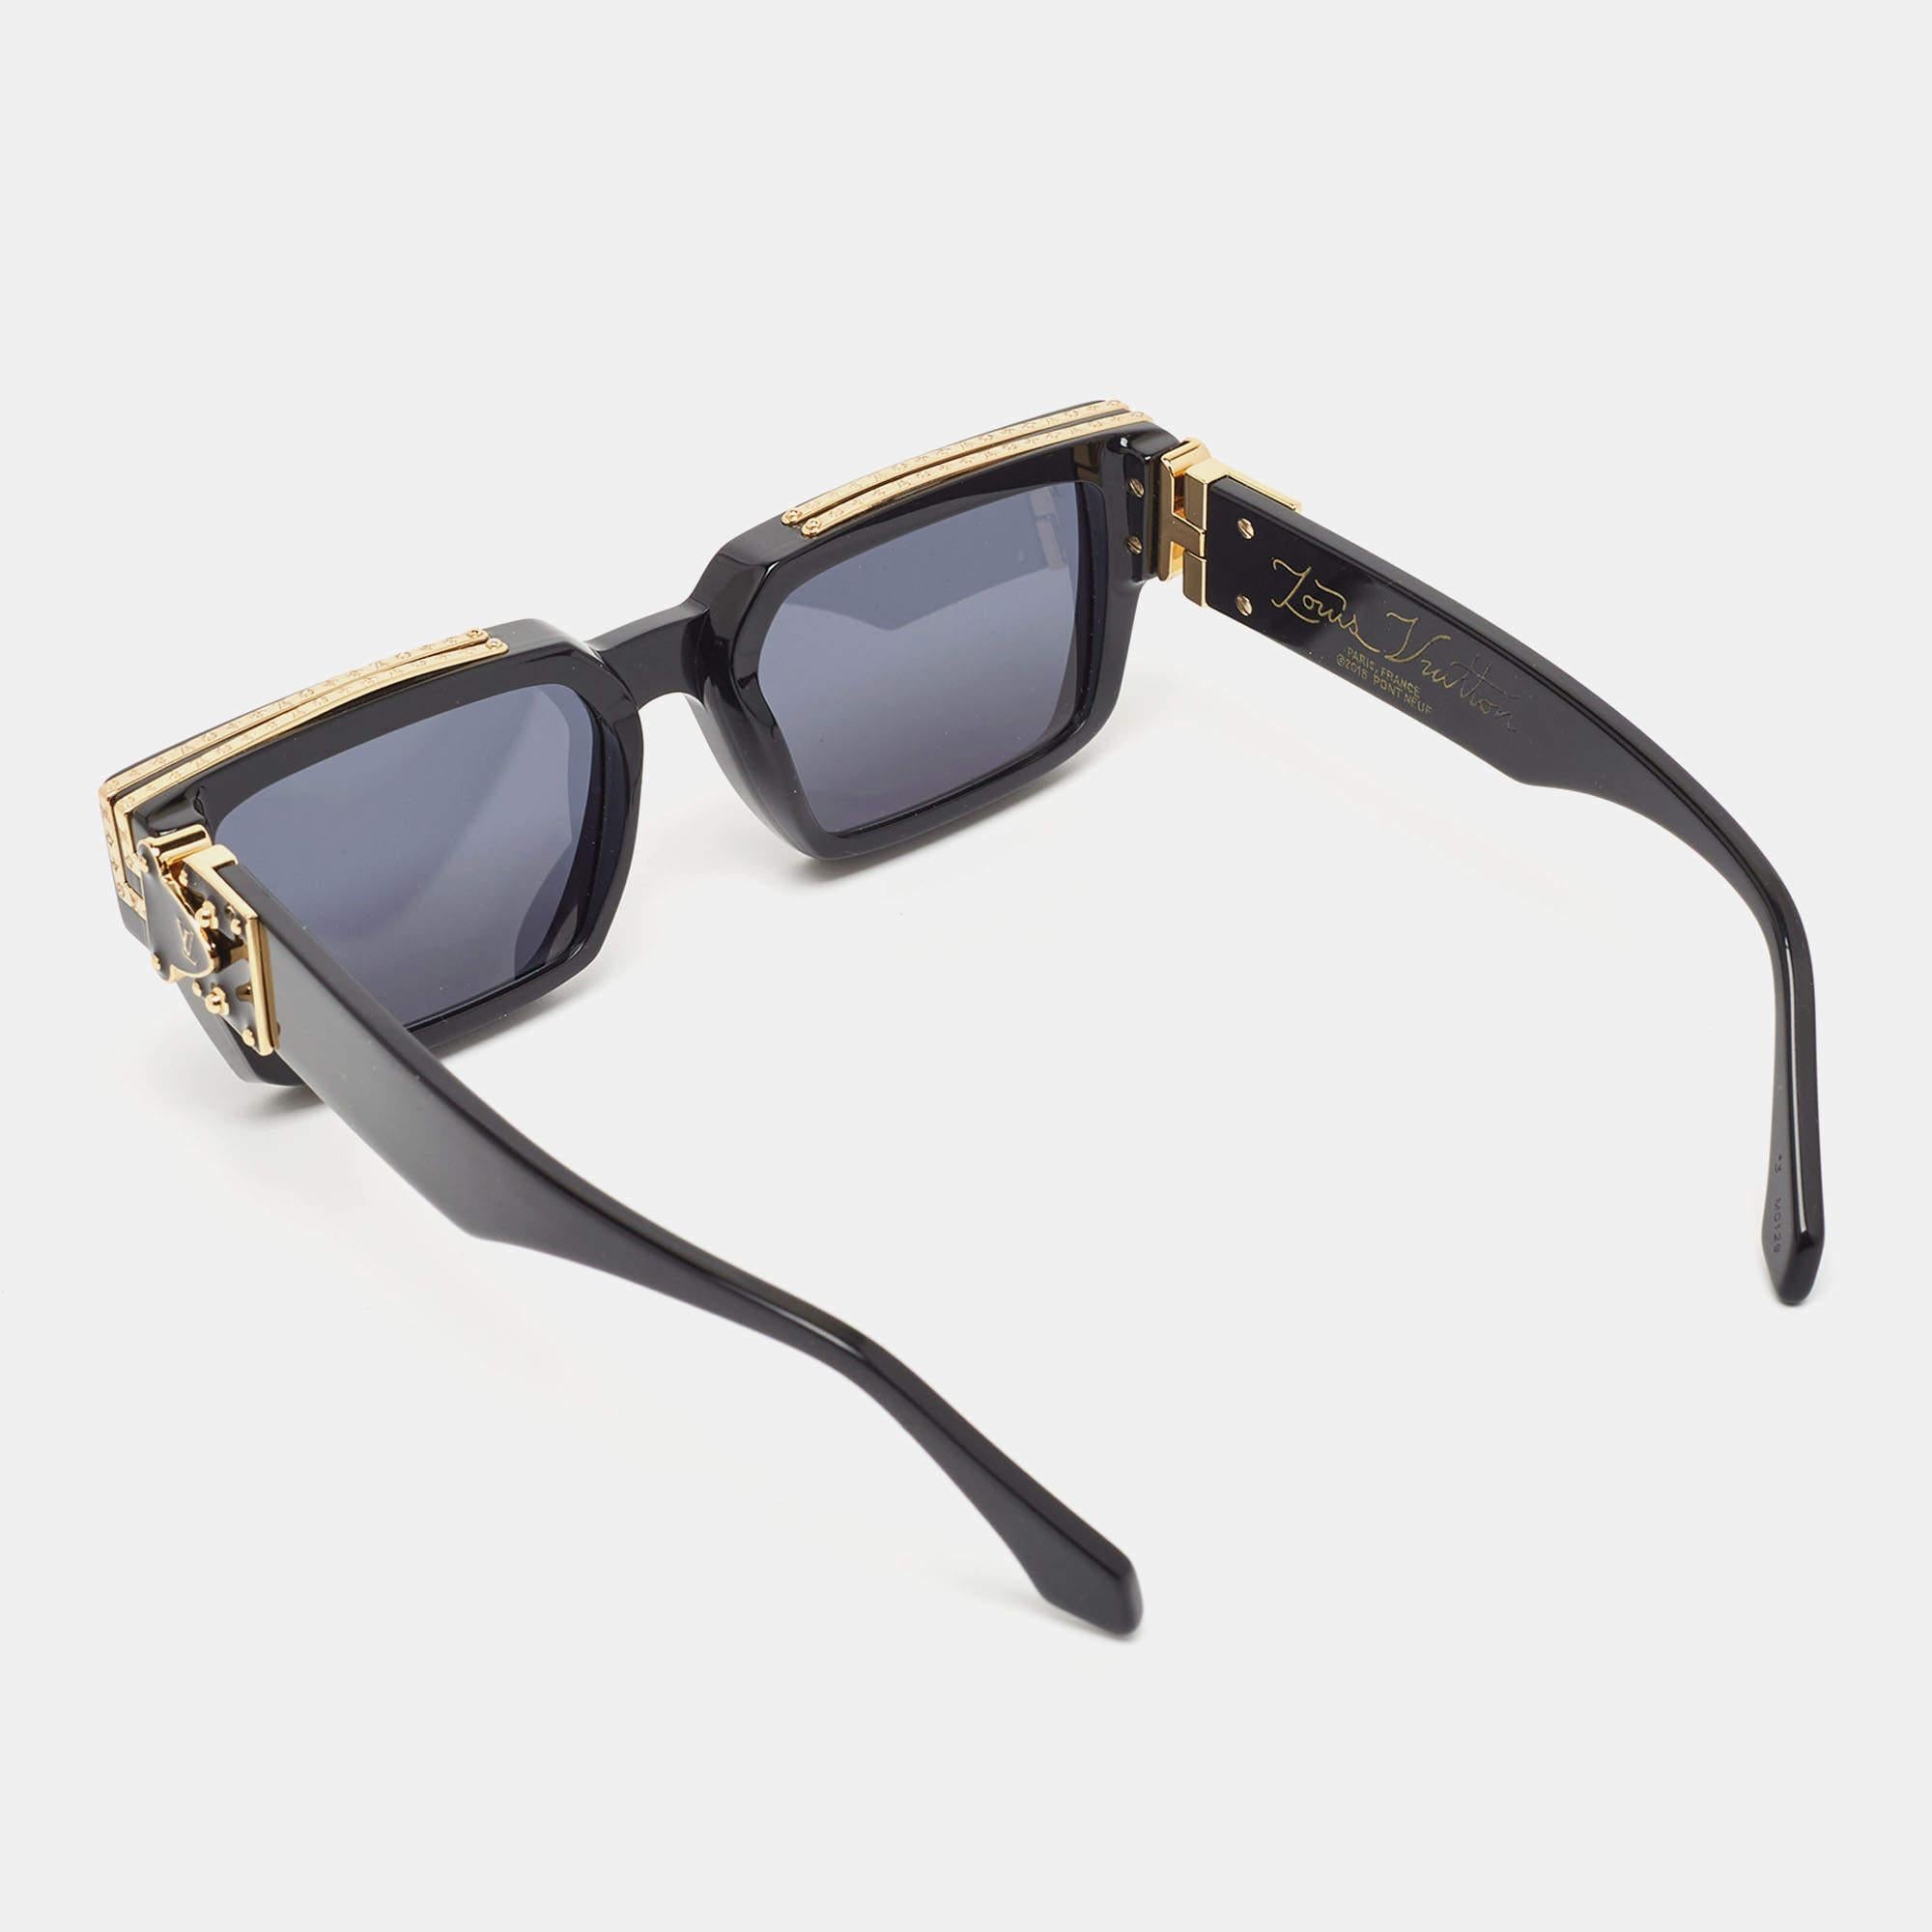 Louis Vuitton's Millionaires sunglasses are a stylish option for when you're out in the sun. They're made from black acetate and beautified with gold-tone metal fittings.

